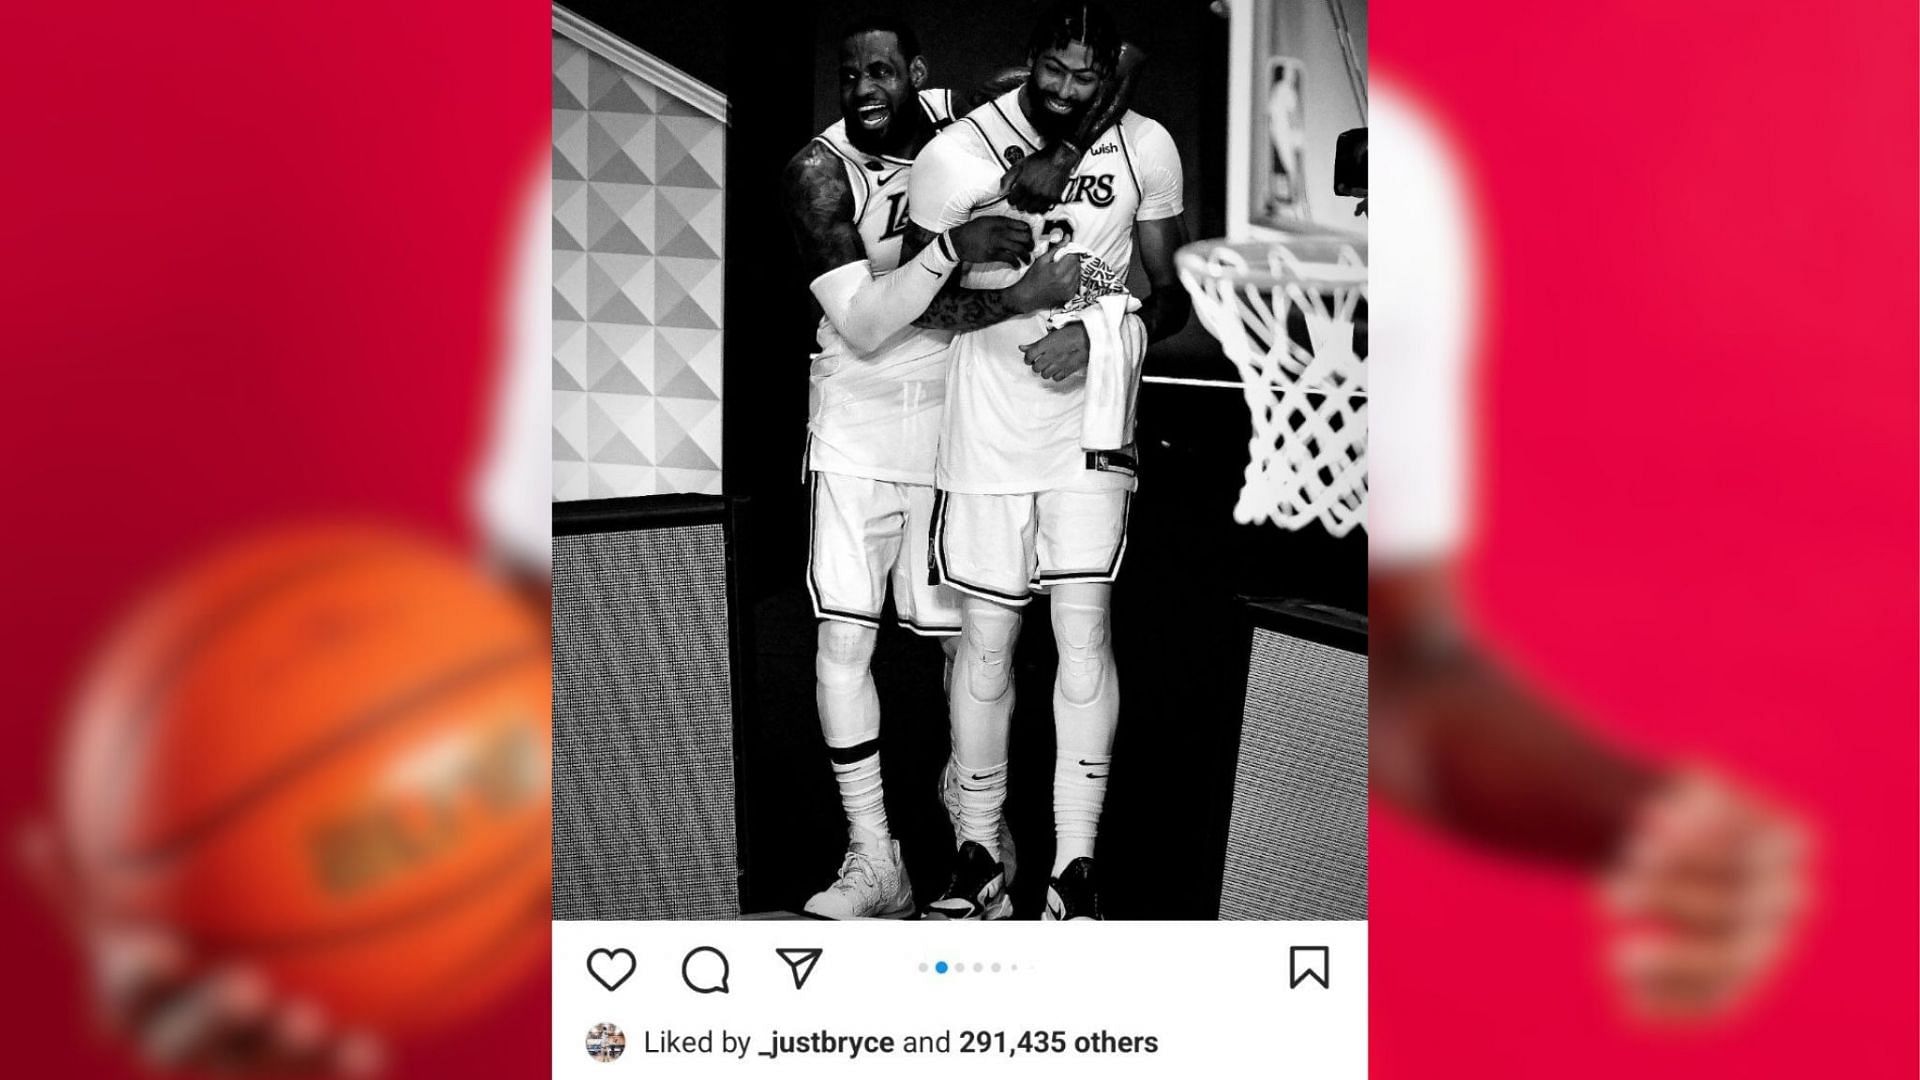 Bryce James likes IG montage of LeBron James and Anthony Davis